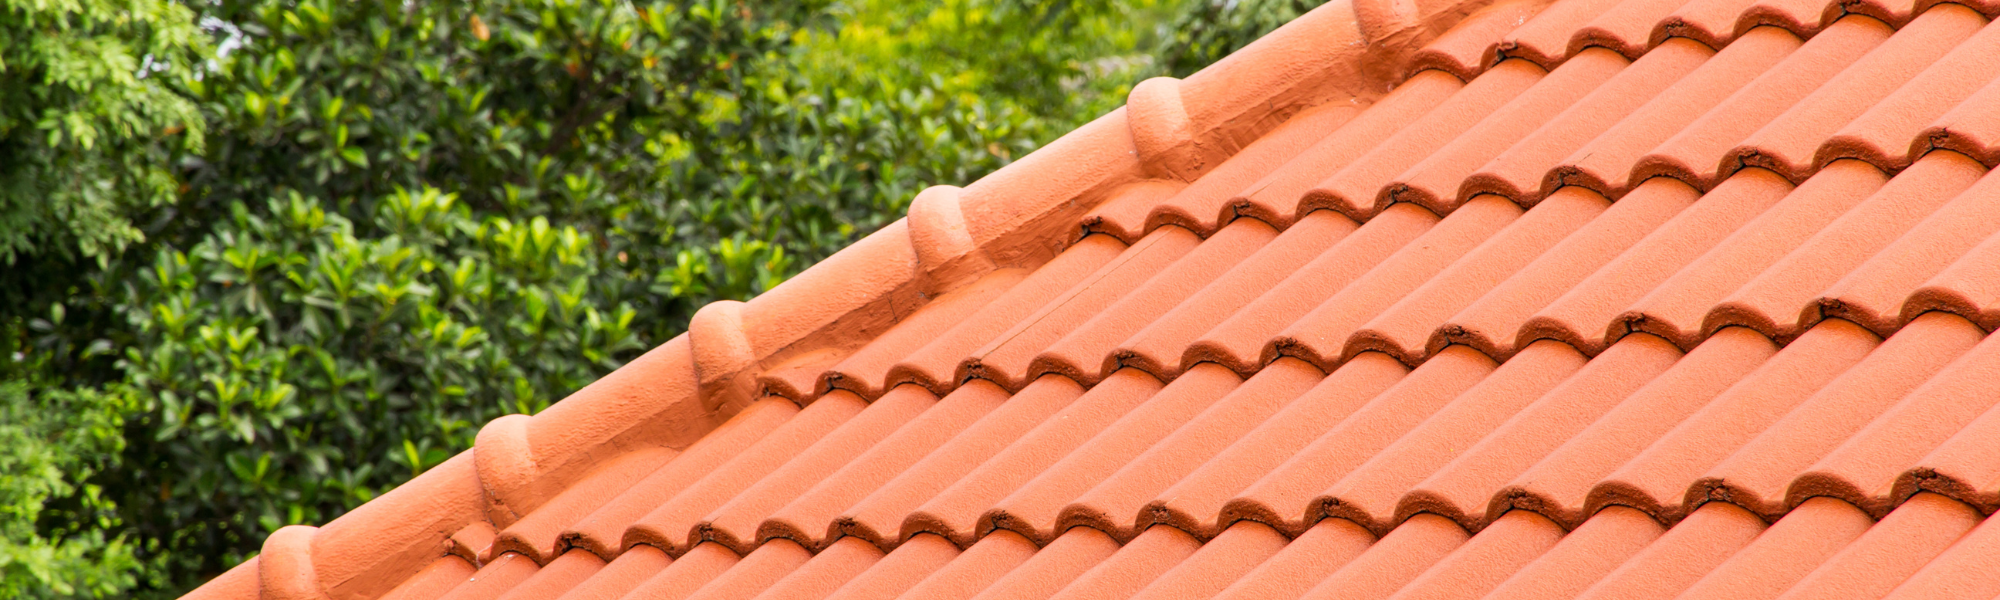 Type of Roof to Install on a Destin Rental Property